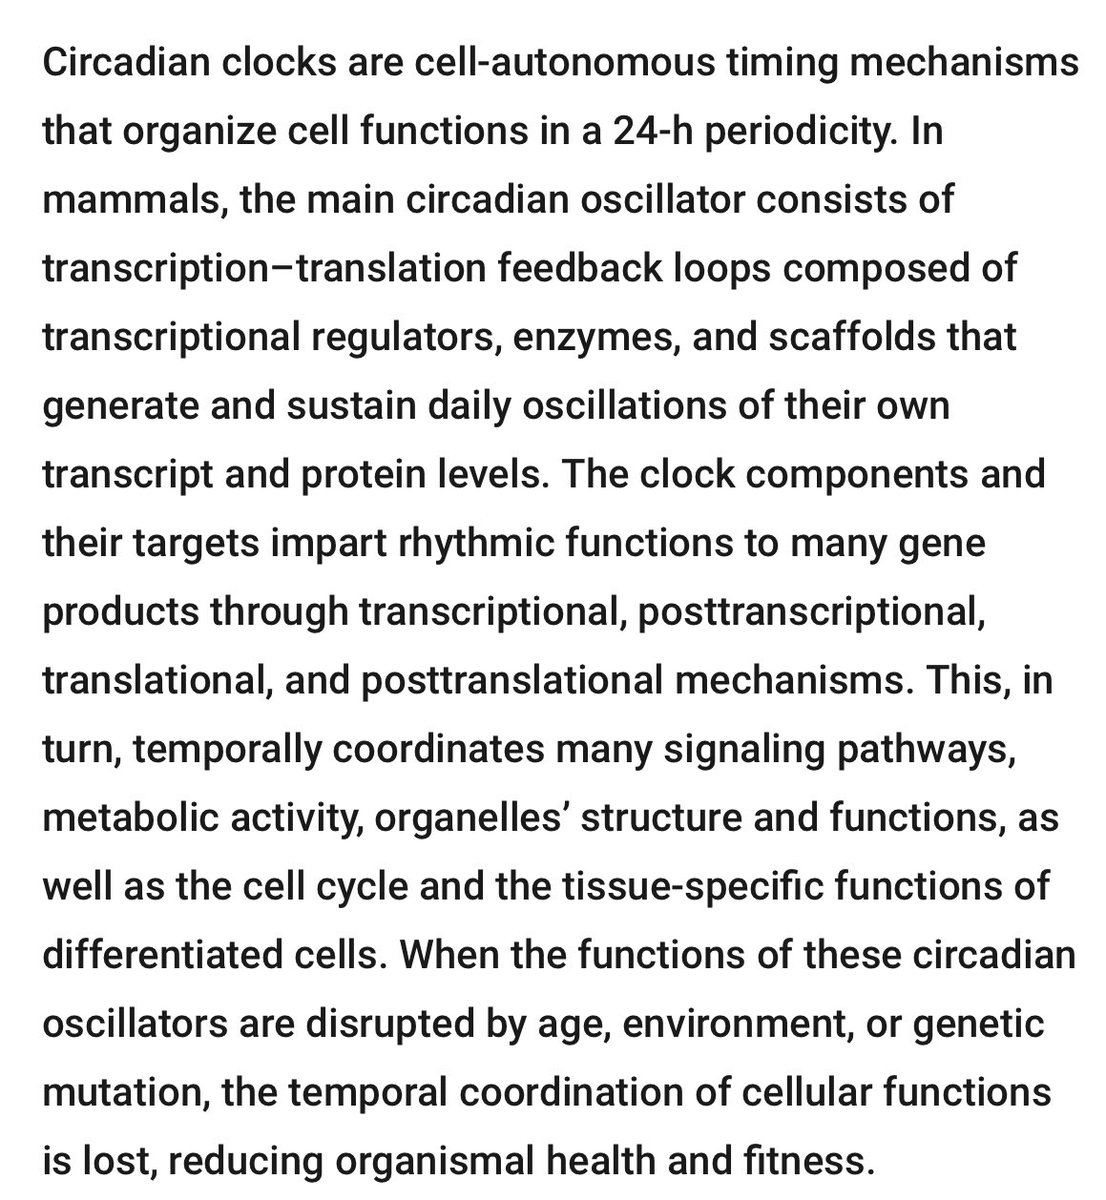 The circadian coordination of cell biology  https://rupress.org/jcb/article/215/1/15/38747/The-circadian-coordination-of-cell-biologyThe